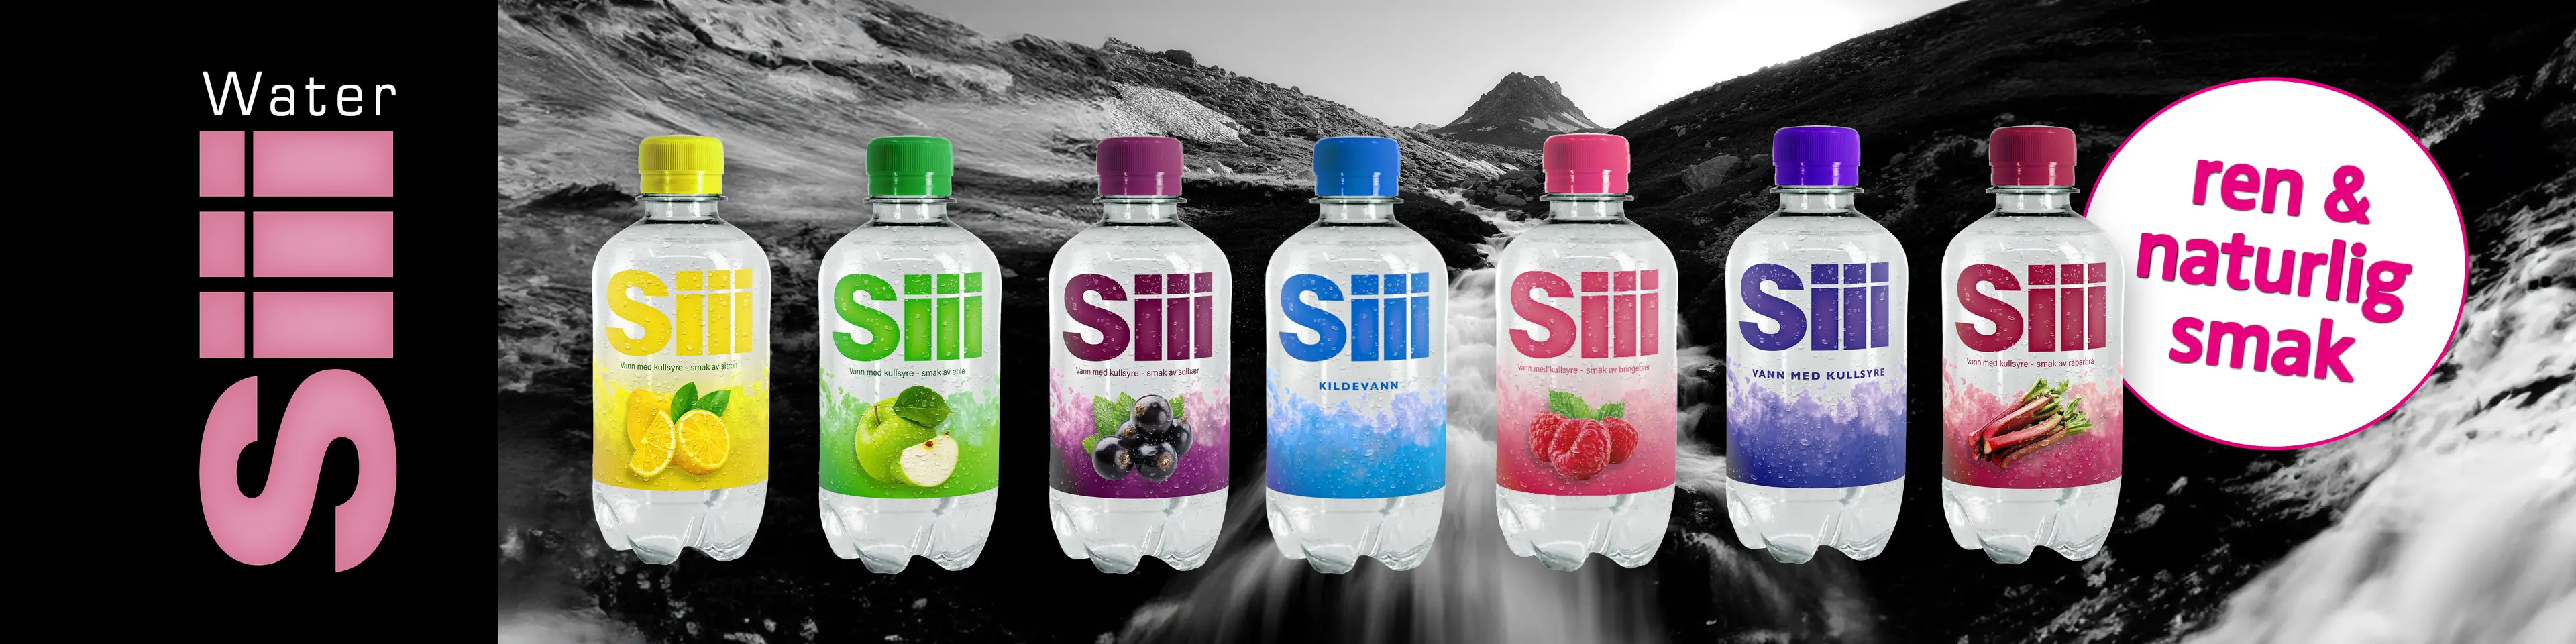 Siii water banner